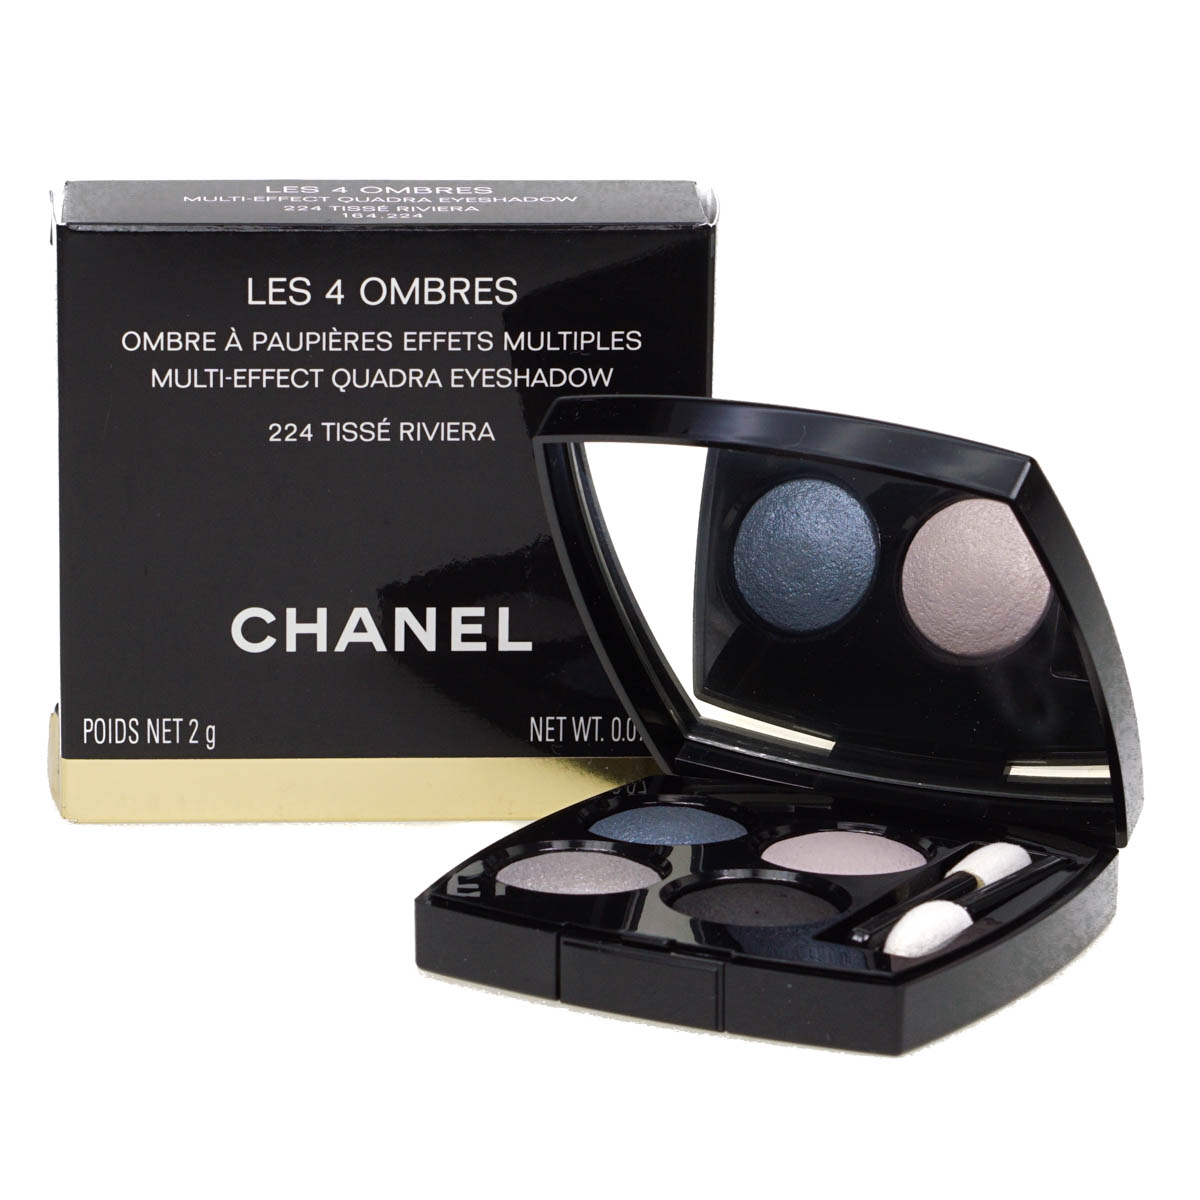 Chanel Les 4 Ombres Eyeshadow Palette Blue Pink 224 Tisse Riviera ...